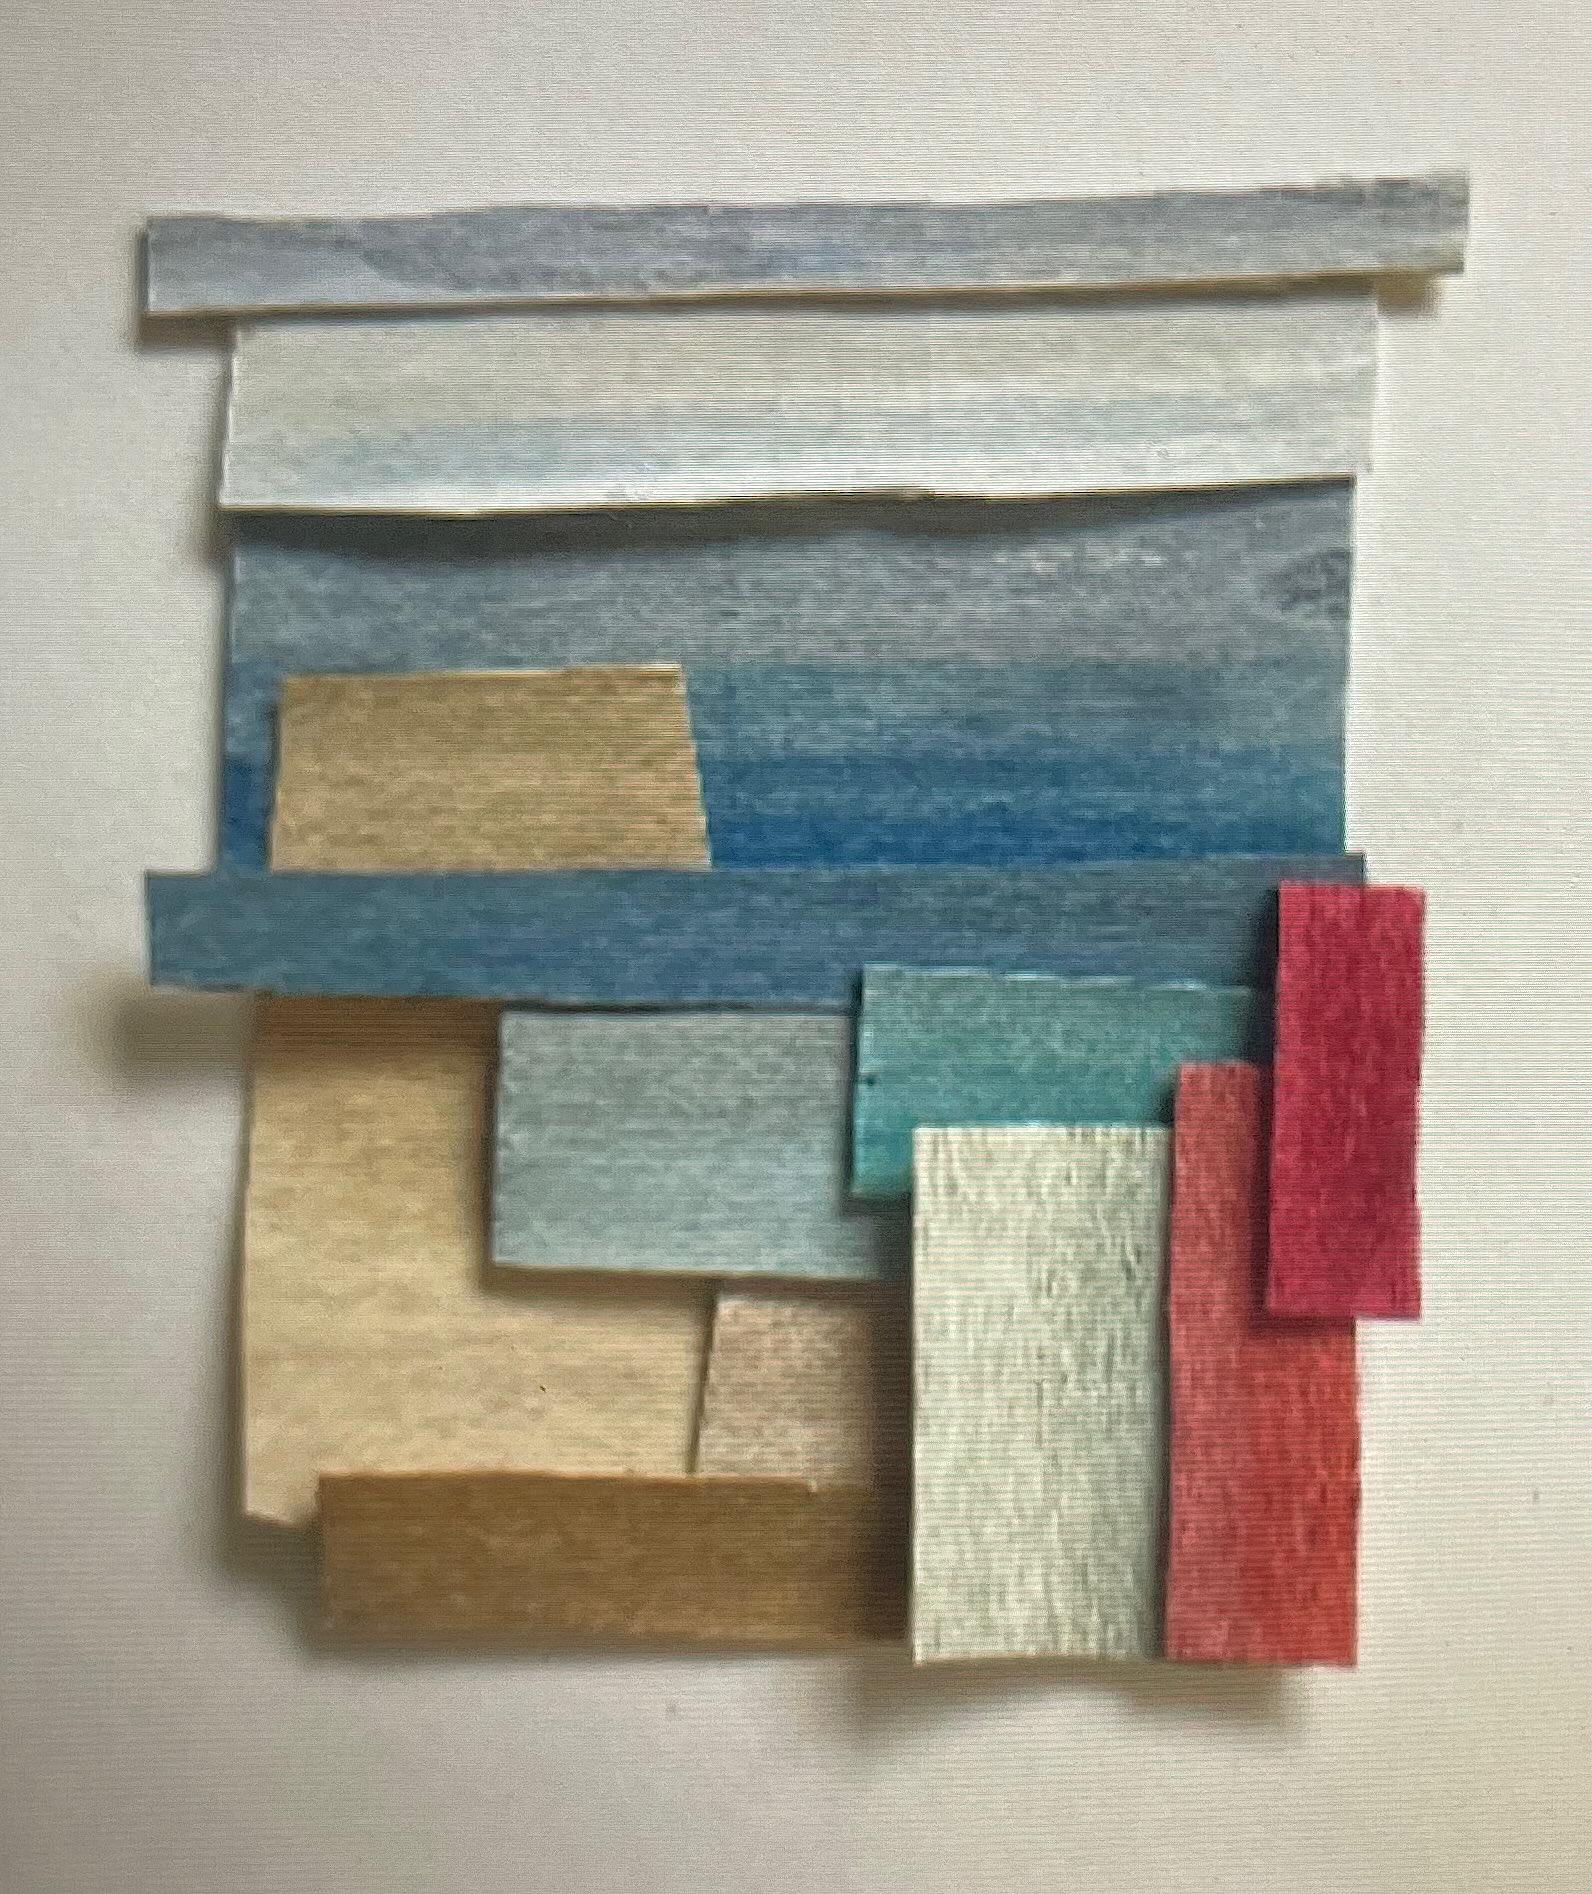 Contemporary French artist Perrine Blaise paints on thin slices of wood.
Weathered effect.
Multi color.
Abstract shapes.
Framed in white wood.
Part of a large collection.
Signed by the artist.